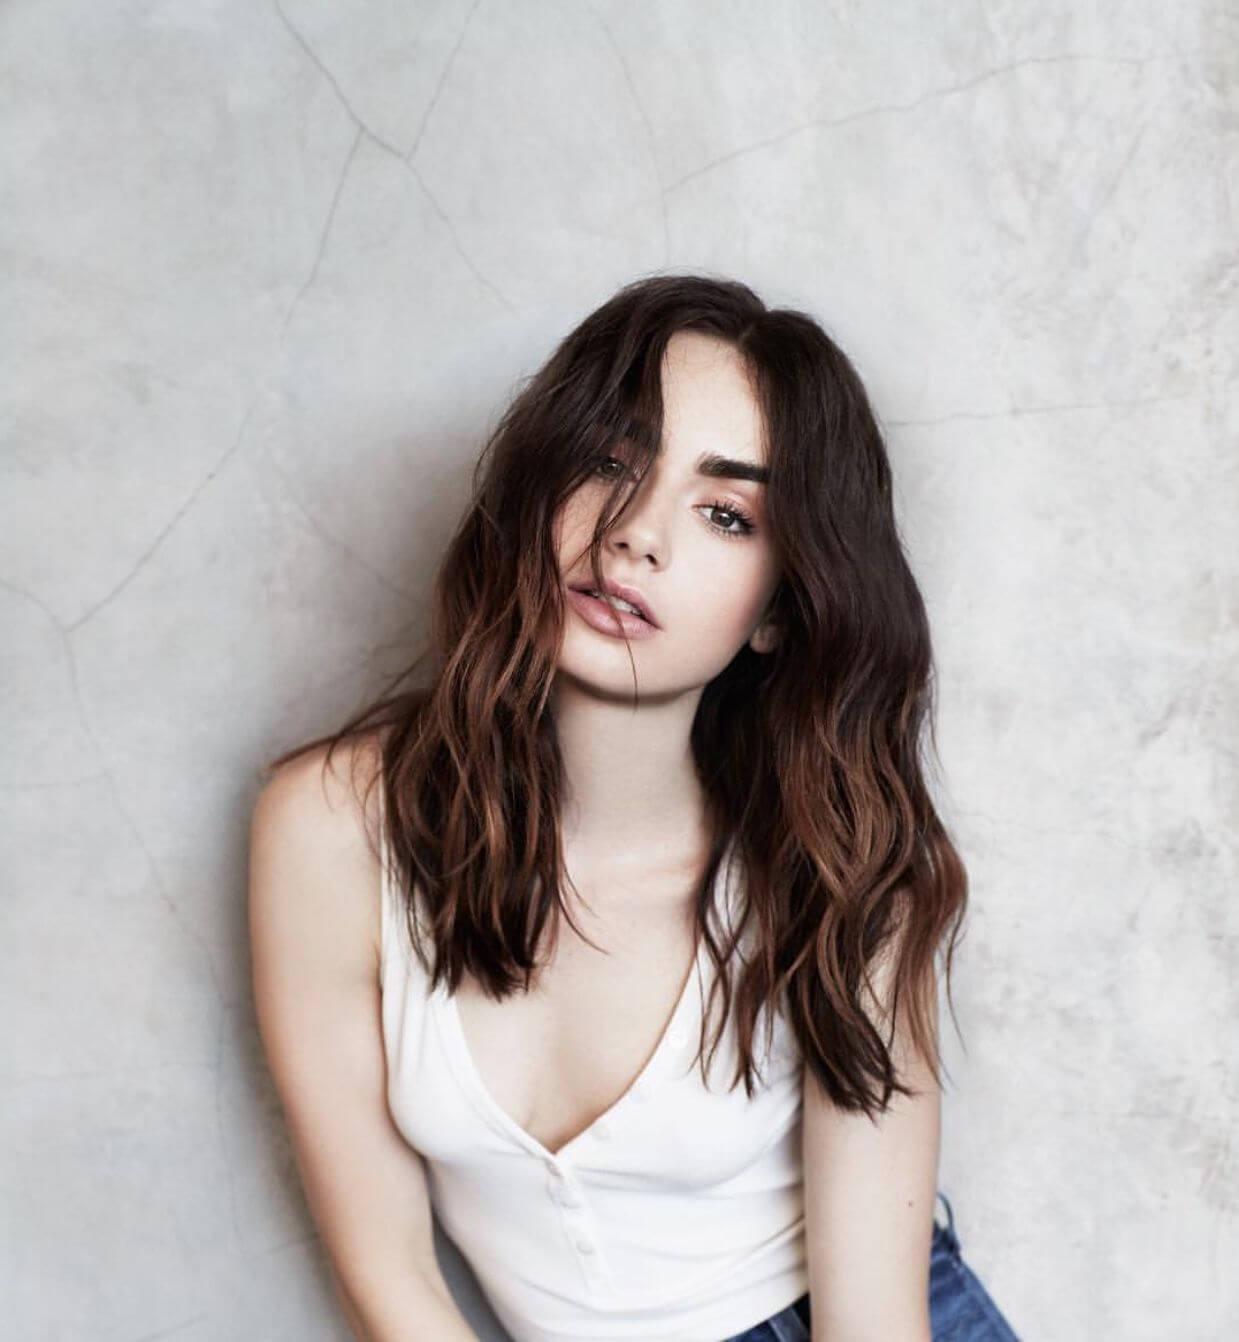 49 Hot Pictures Of Lily Collins Which Will Make You Want Her | Best Of Comic Books